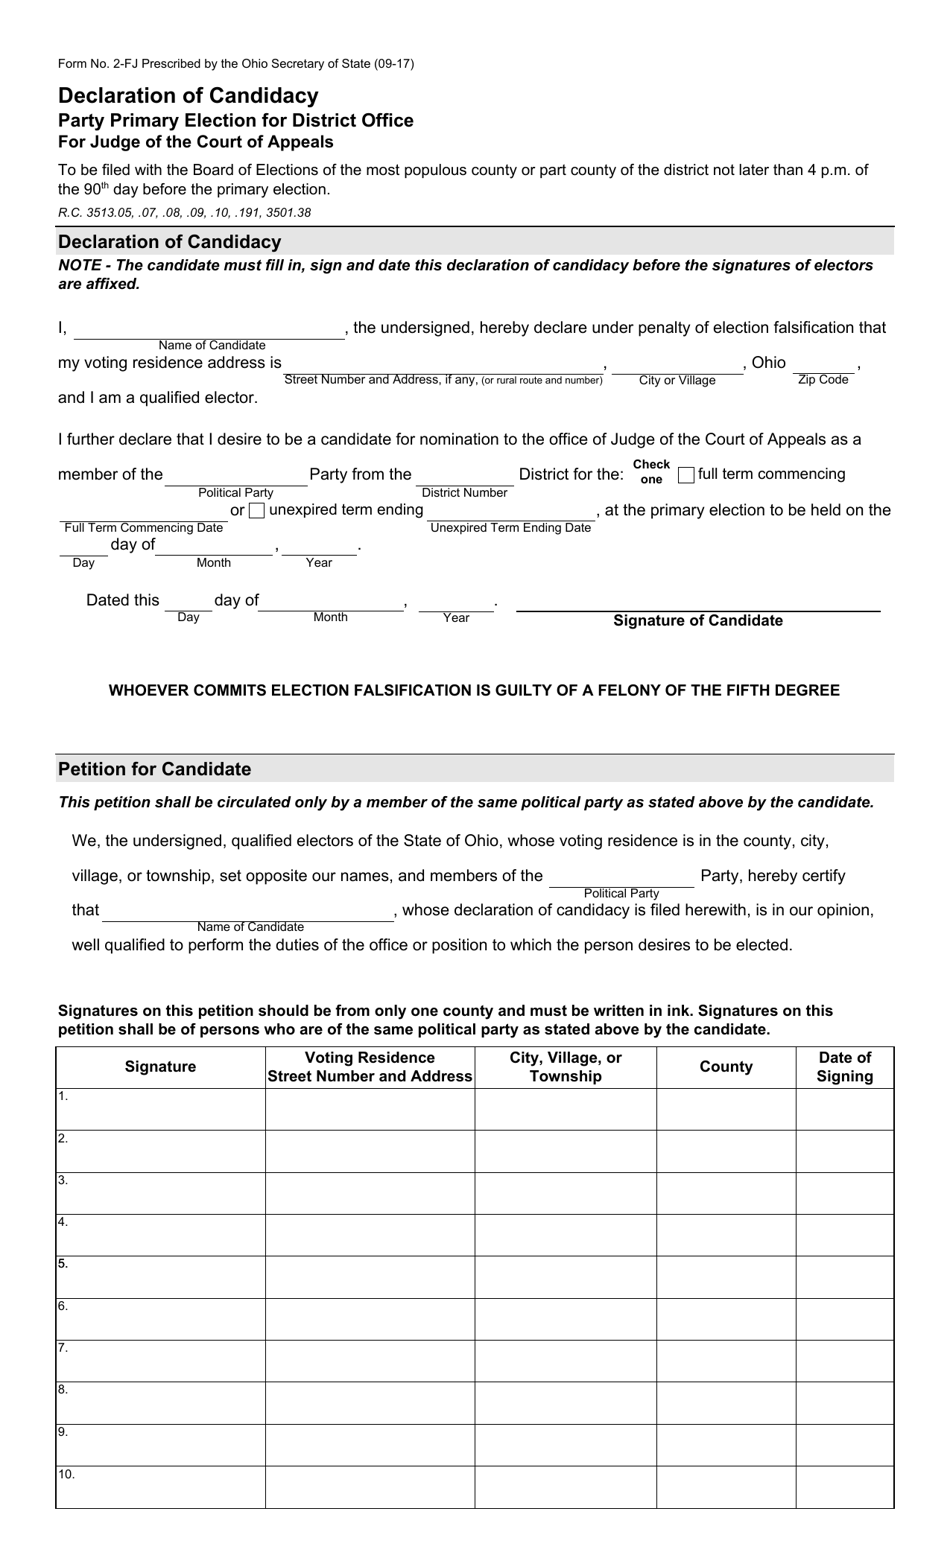 Form 2-FJ Declaration of Candidacy - Party Primary Election for District Office for Judge of the Court of Appeals - Ohio, Page 1